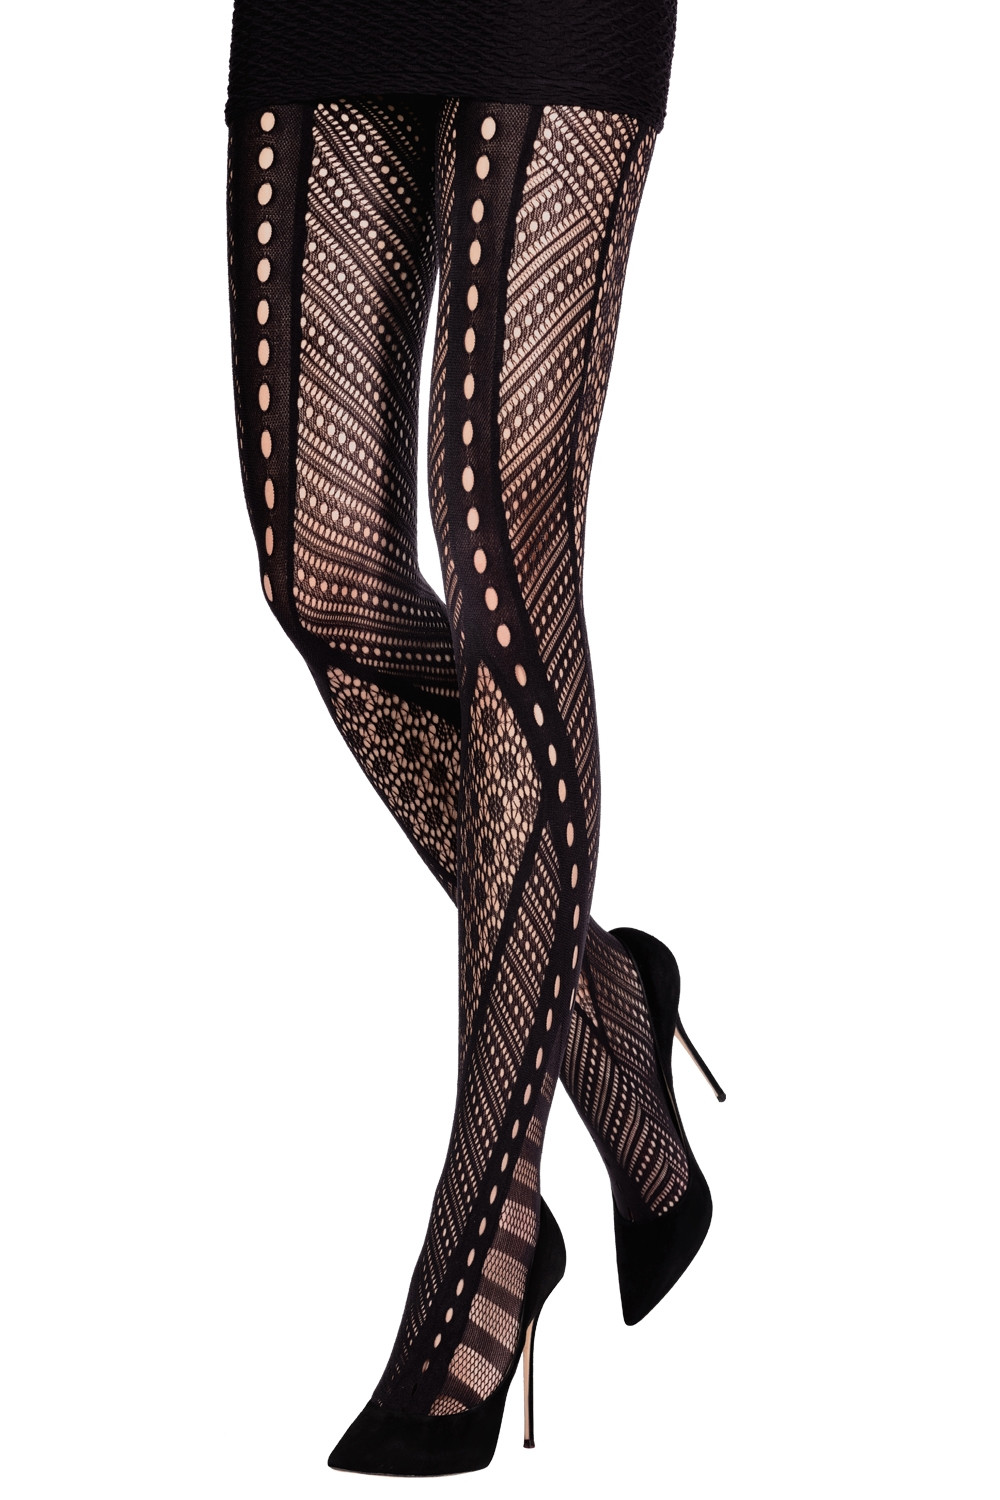 LACE AND FISHNET TIGHTS